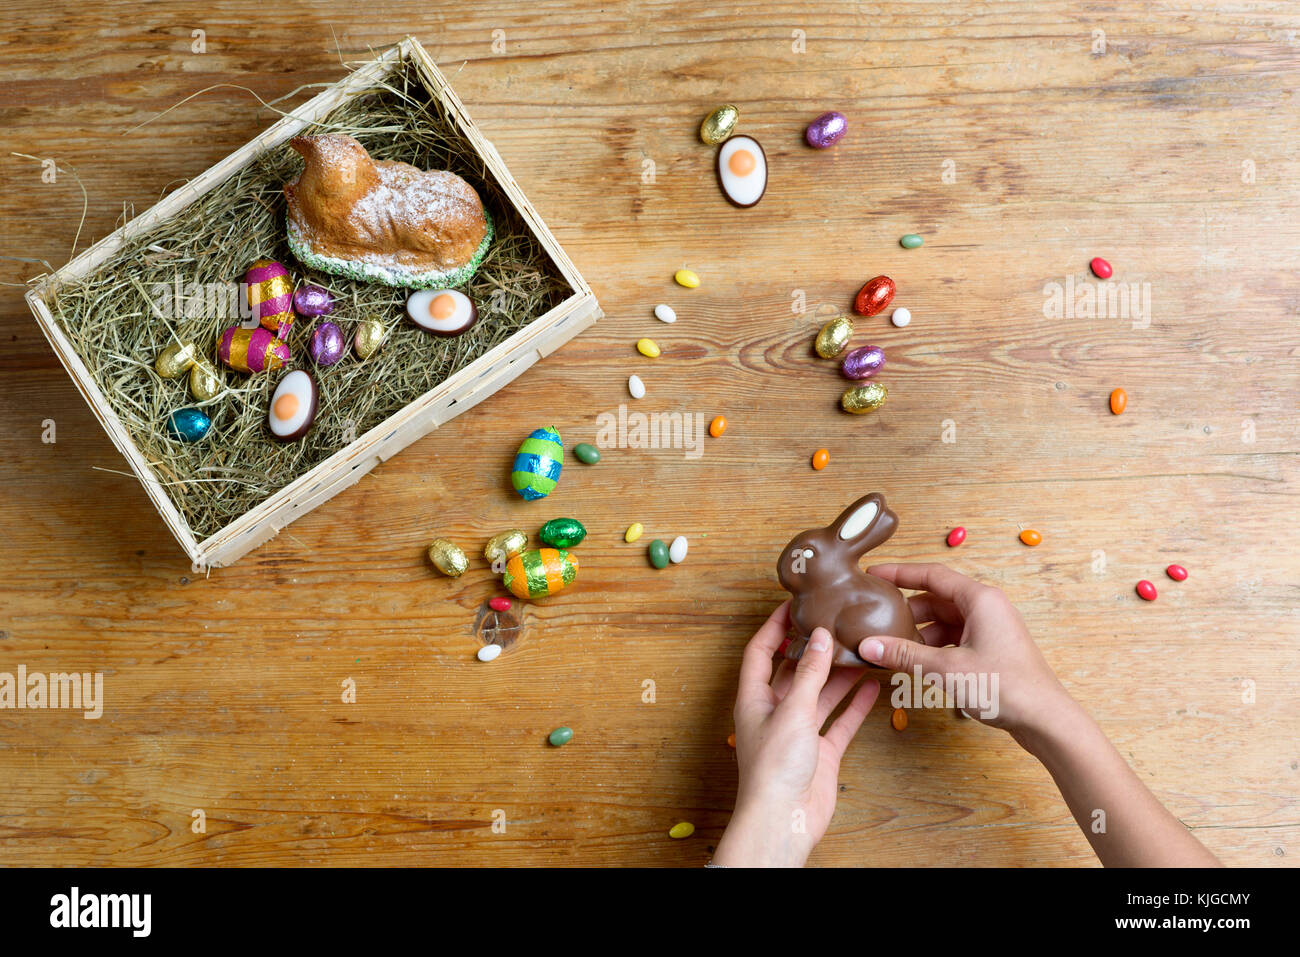 Hands filling Easter nest Stock Photo - Alamy